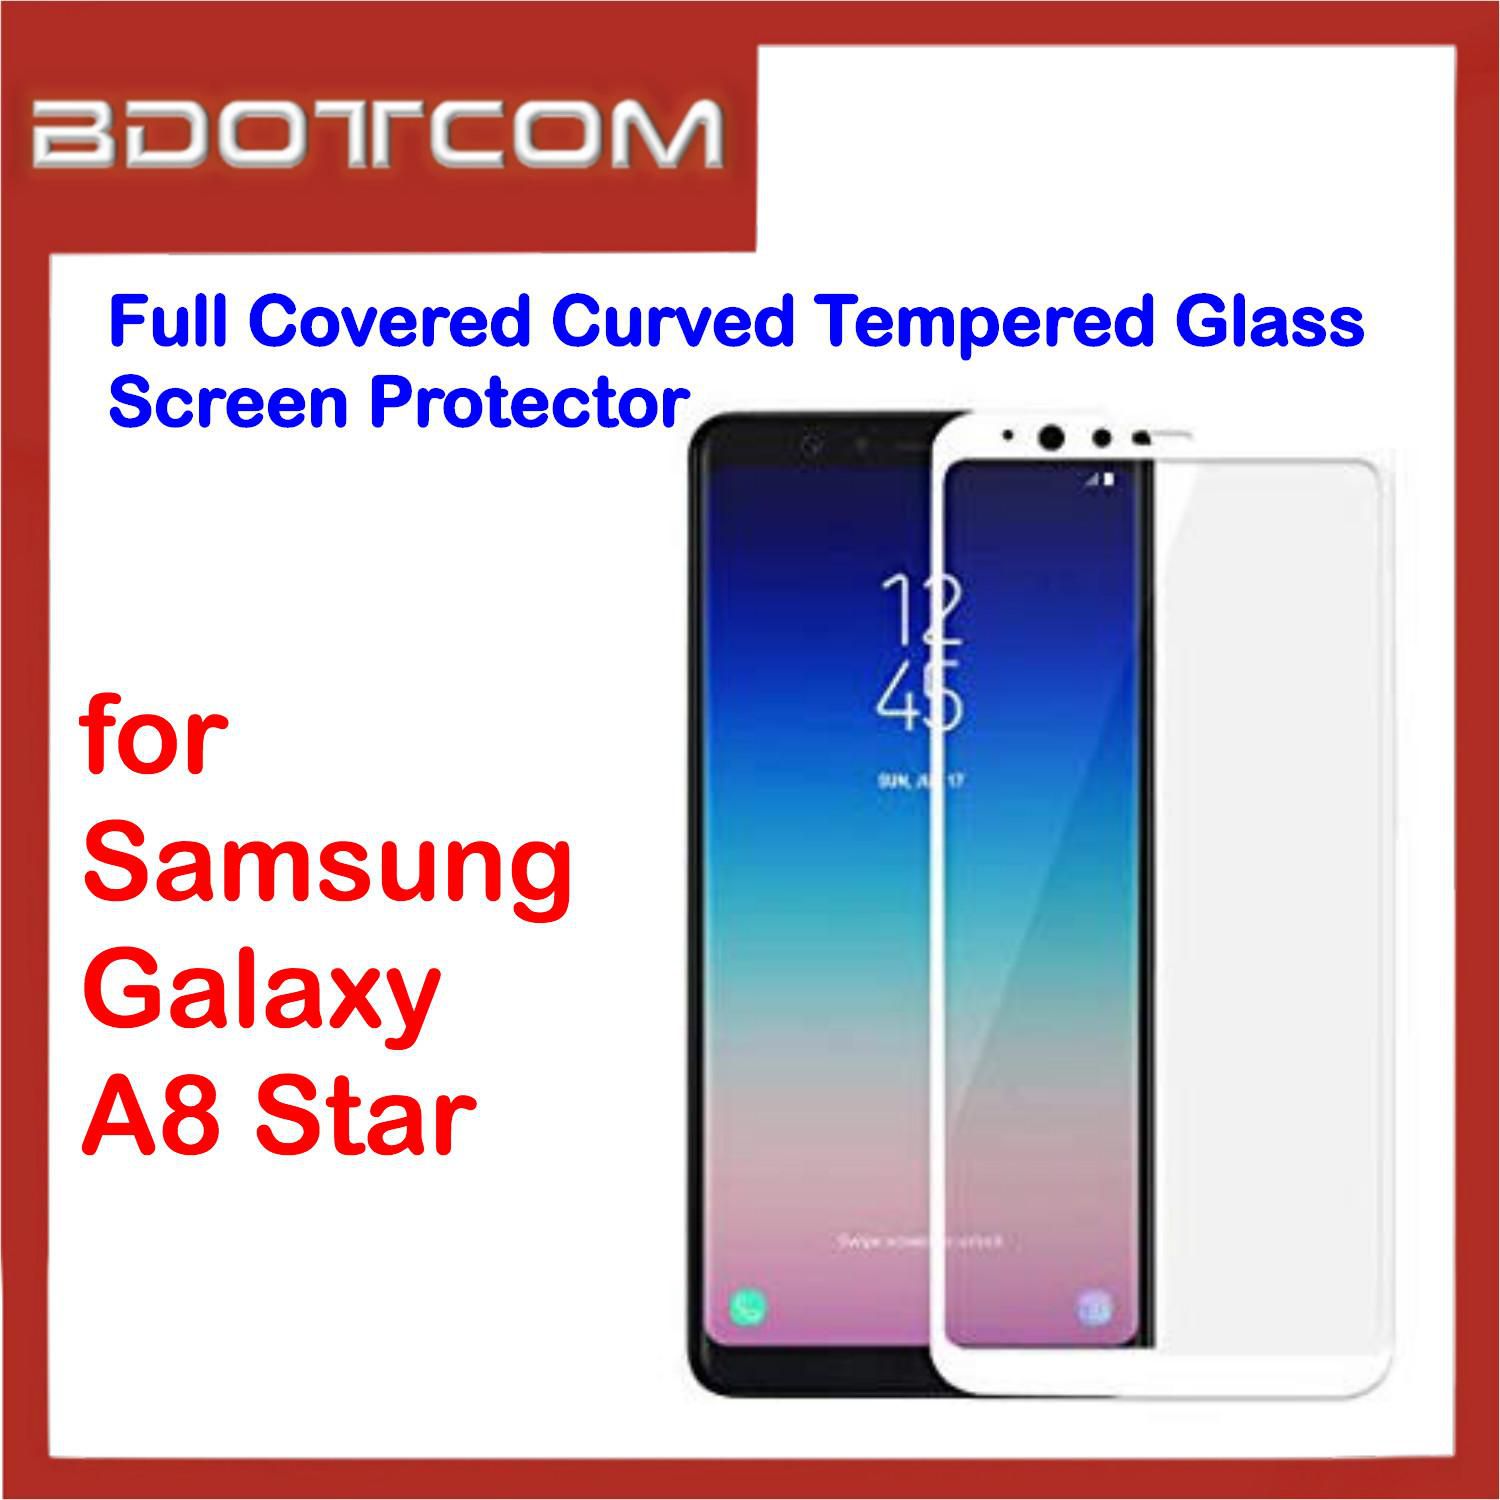 Bdotcom Full Covered Tempered Glass Screen for Samsung Galaxy A8 Star (White)